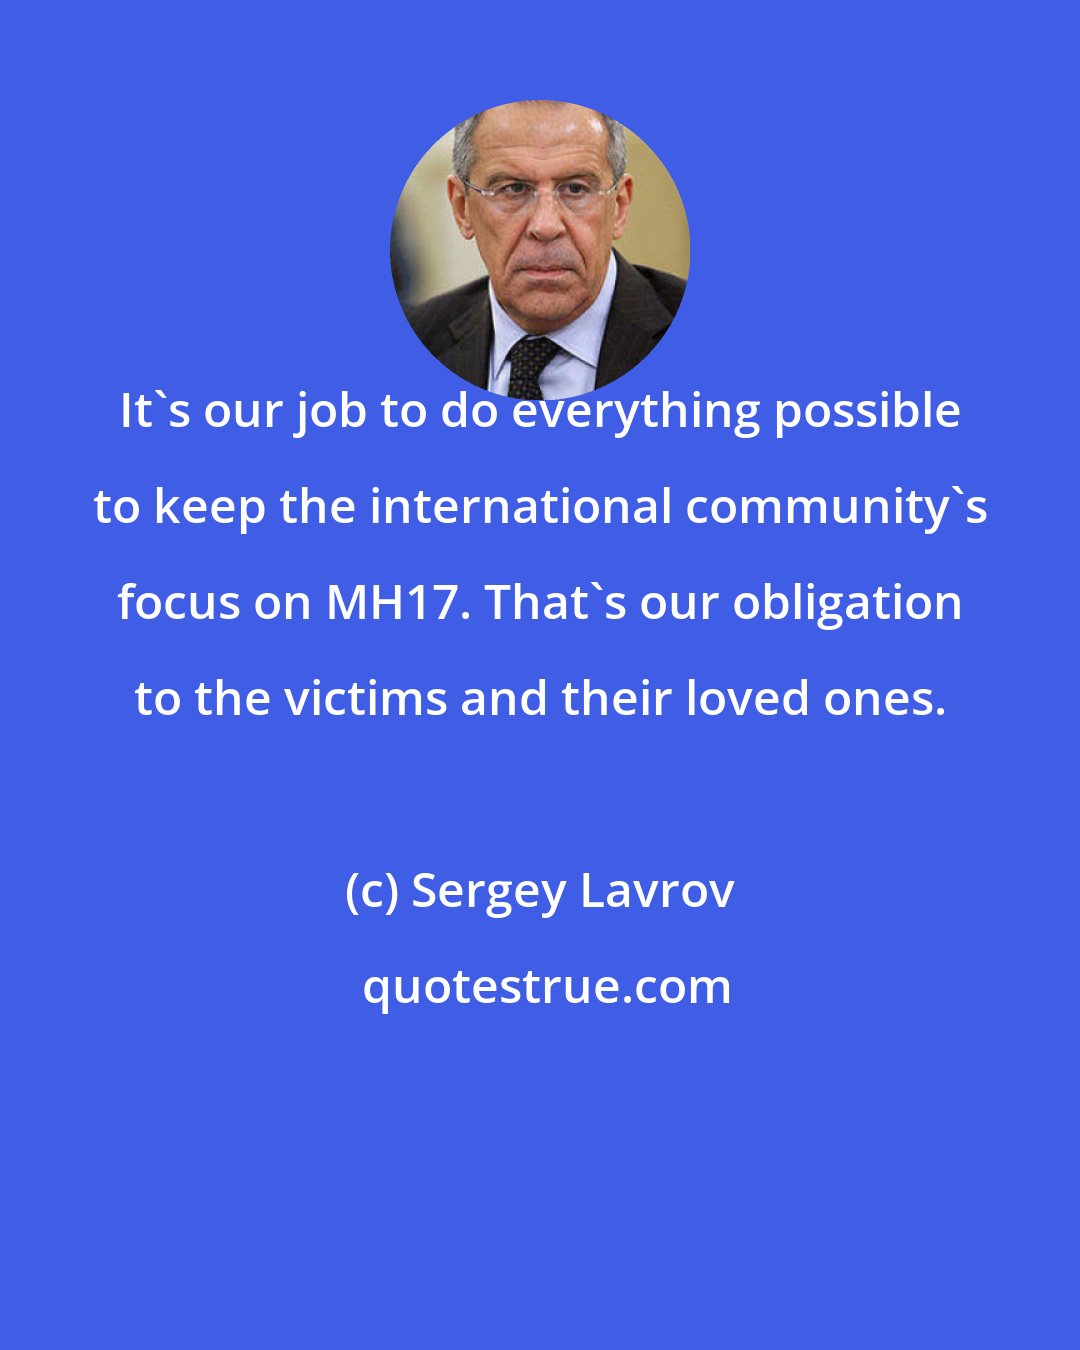 Sergey Lavrov: It's our job to do everything possible to keep the international community's focus on MH17. That's our obligation to the victims and their loved ones.